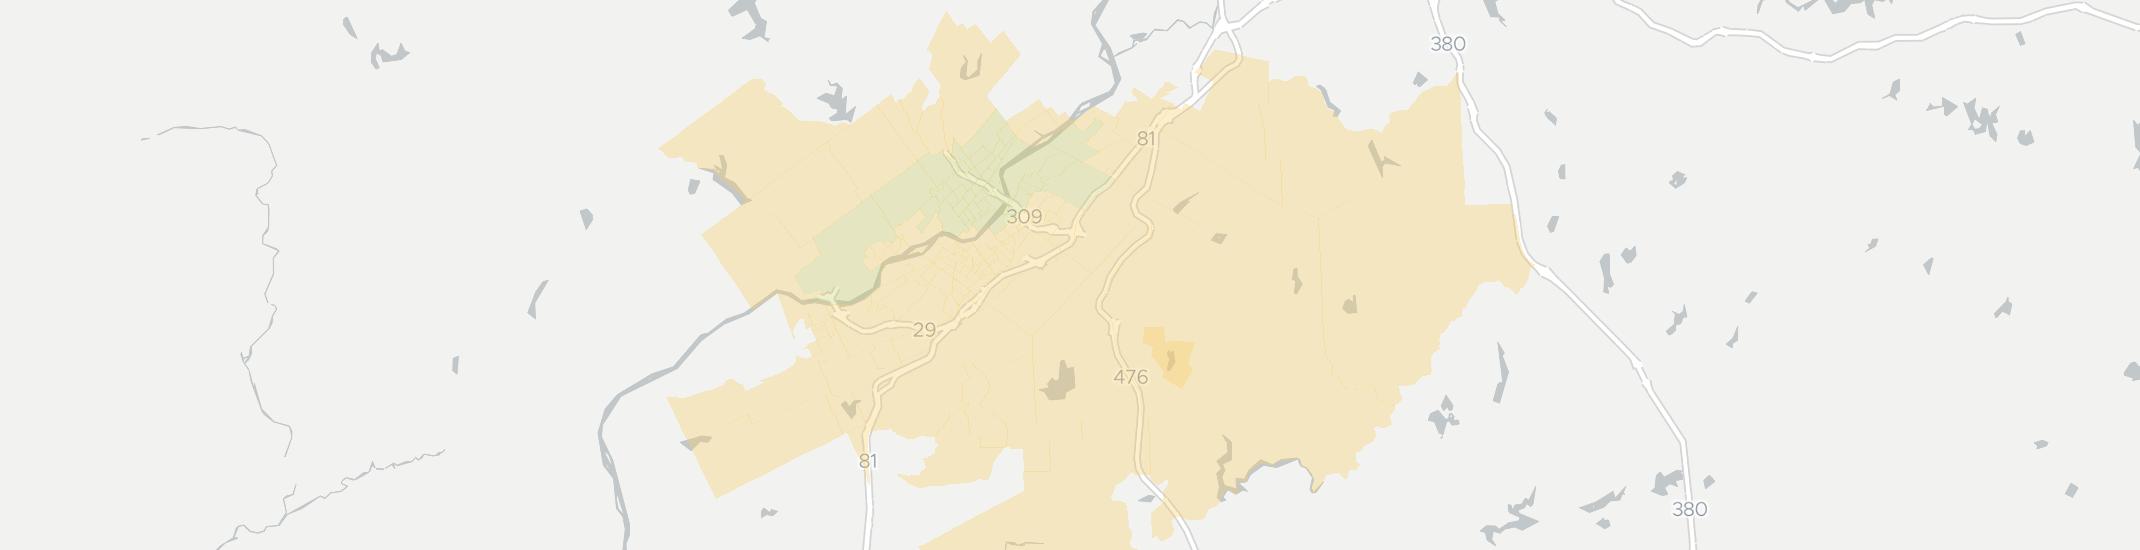 Wilkes Barre Internet Competition Map. Click for interactive map